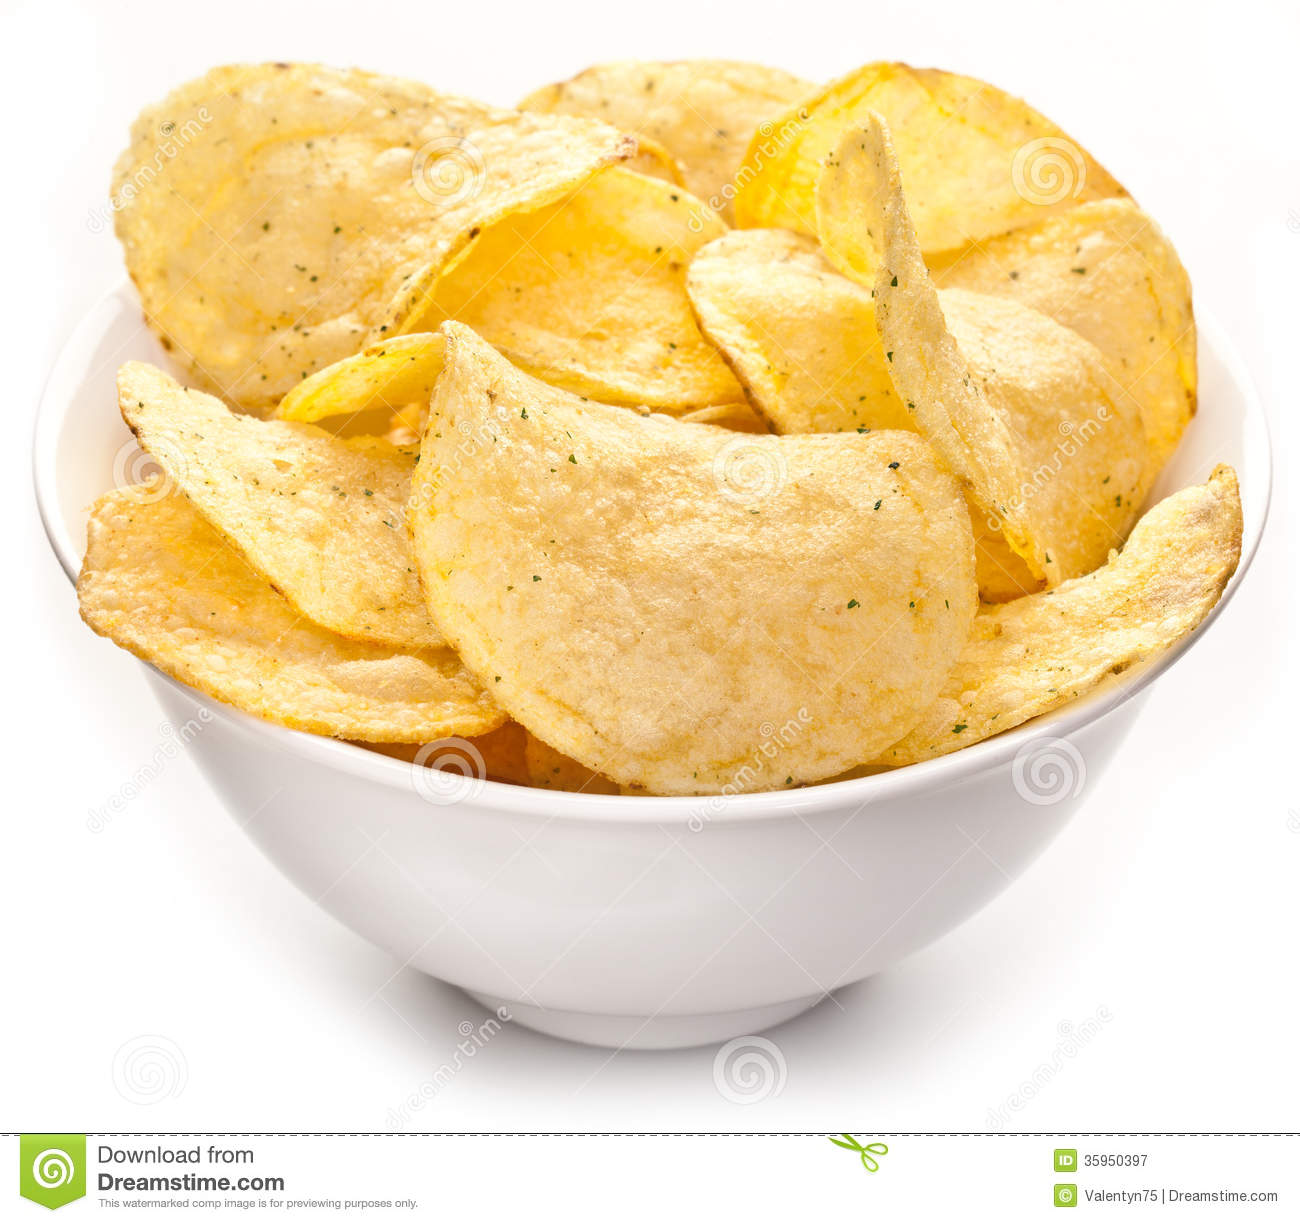 Potato Chips In A Bowl  Royalty Free Stock Photography   Image    